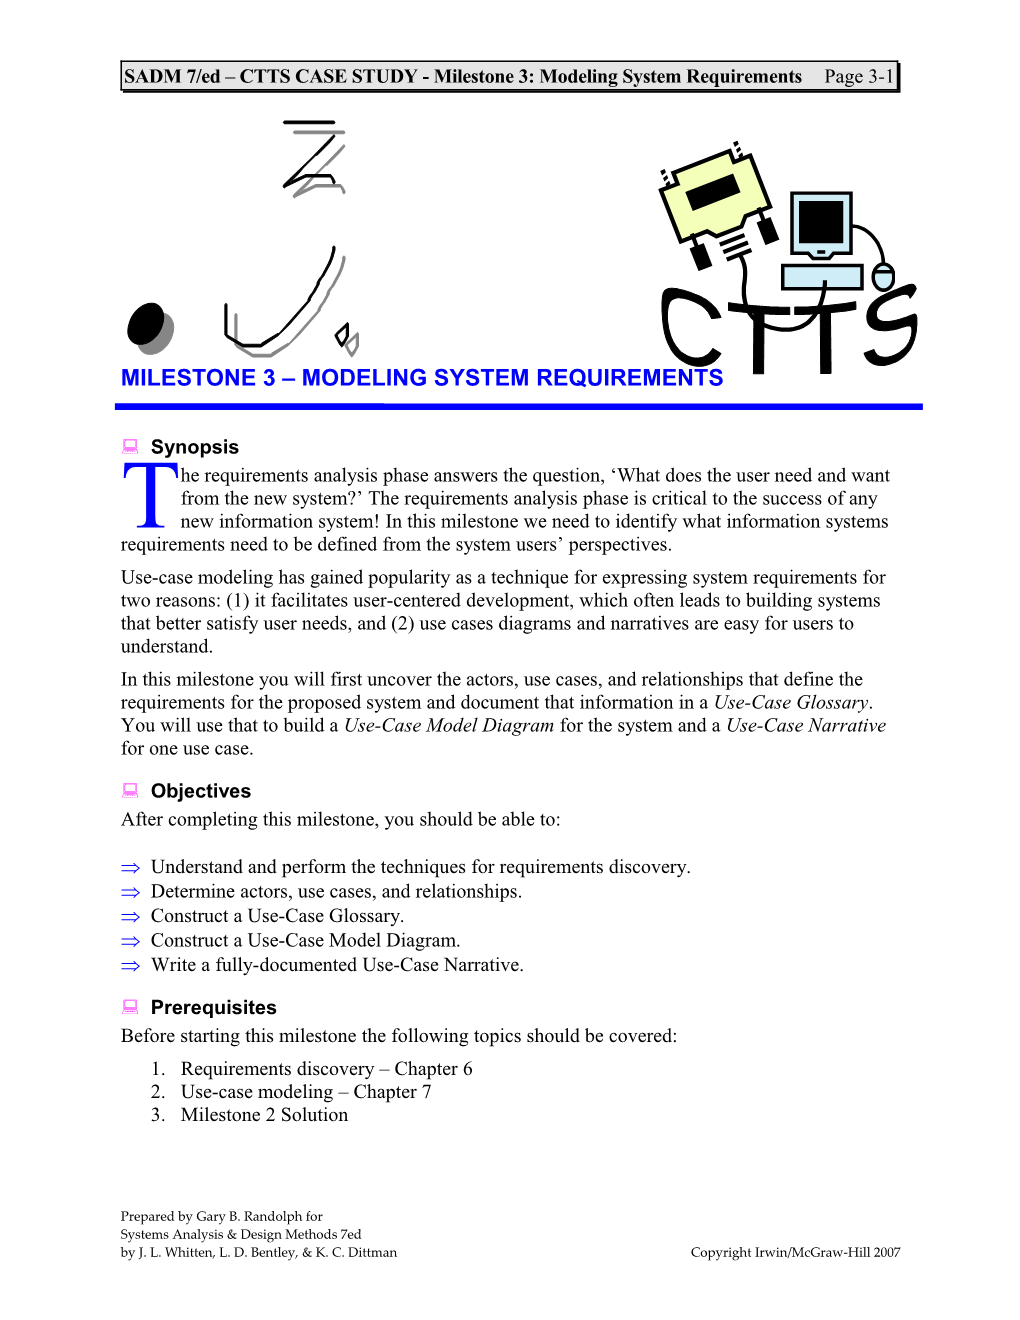 SADM 7/Ed CTTS CASE STUDY - Milestone 3: Modeling System Requirements Page 3-5